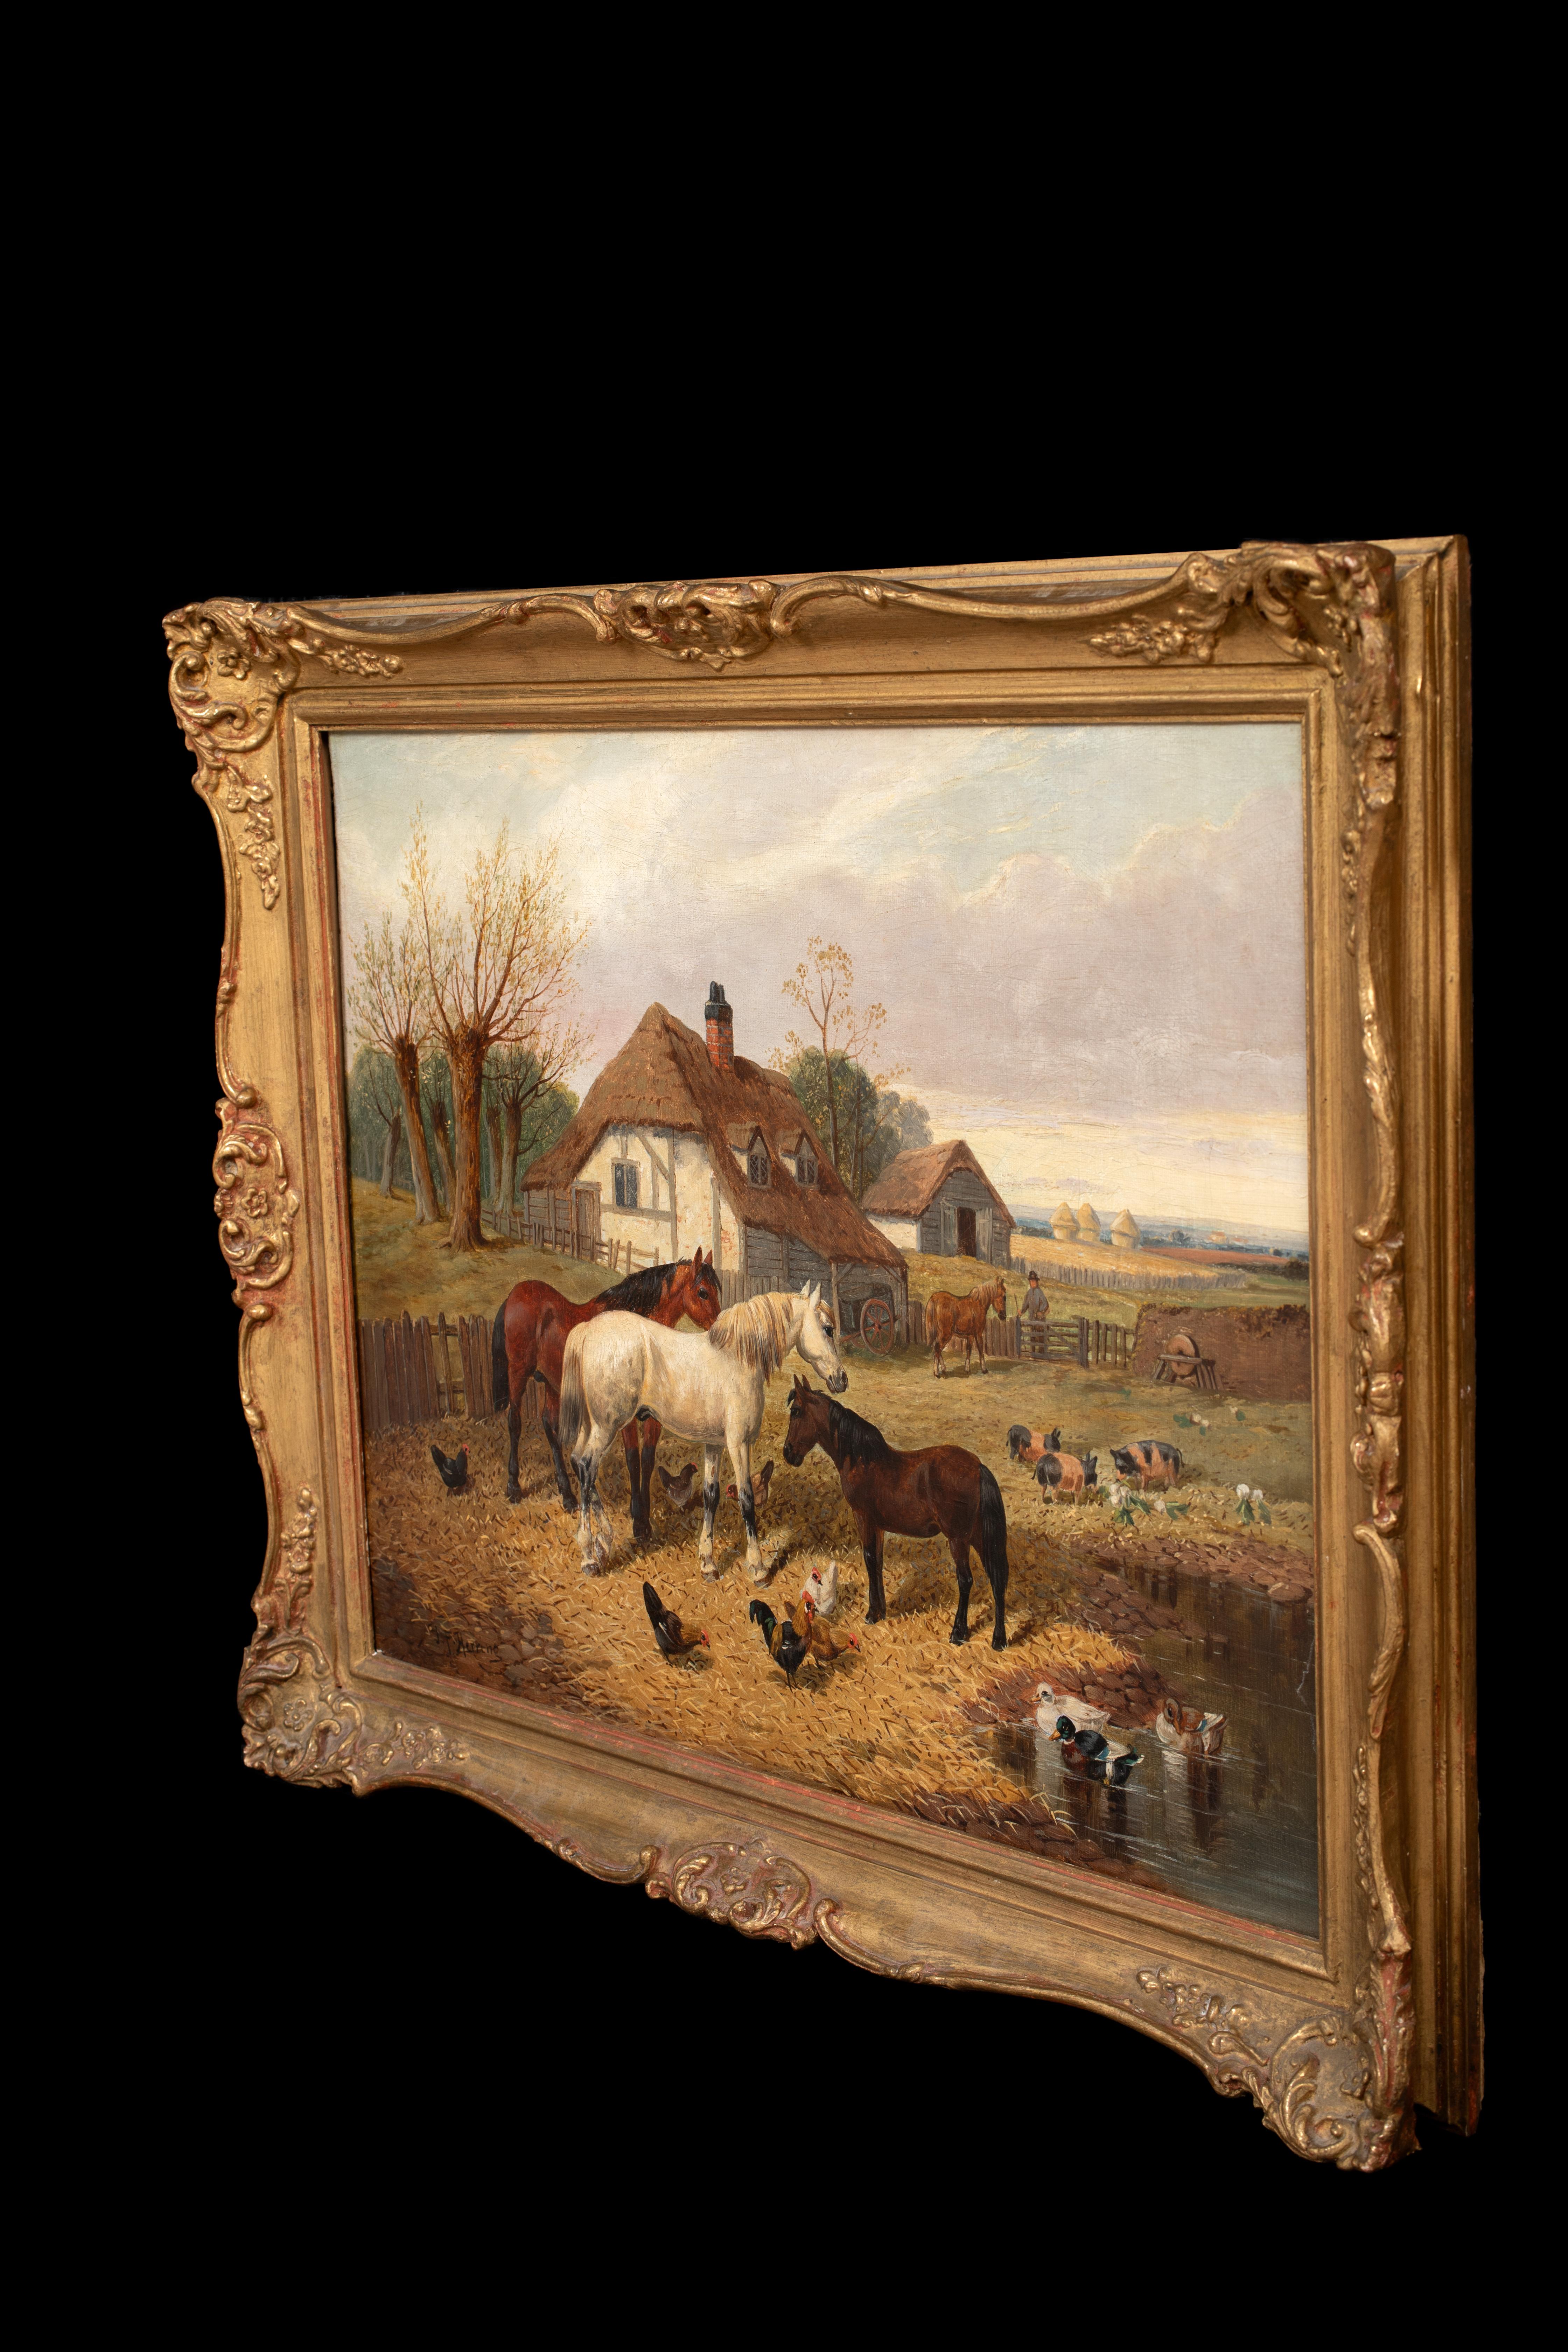 Horses, Chickens & Pigs On The Farm, 17th Century   by John Frederick II HERRING For Sale 5